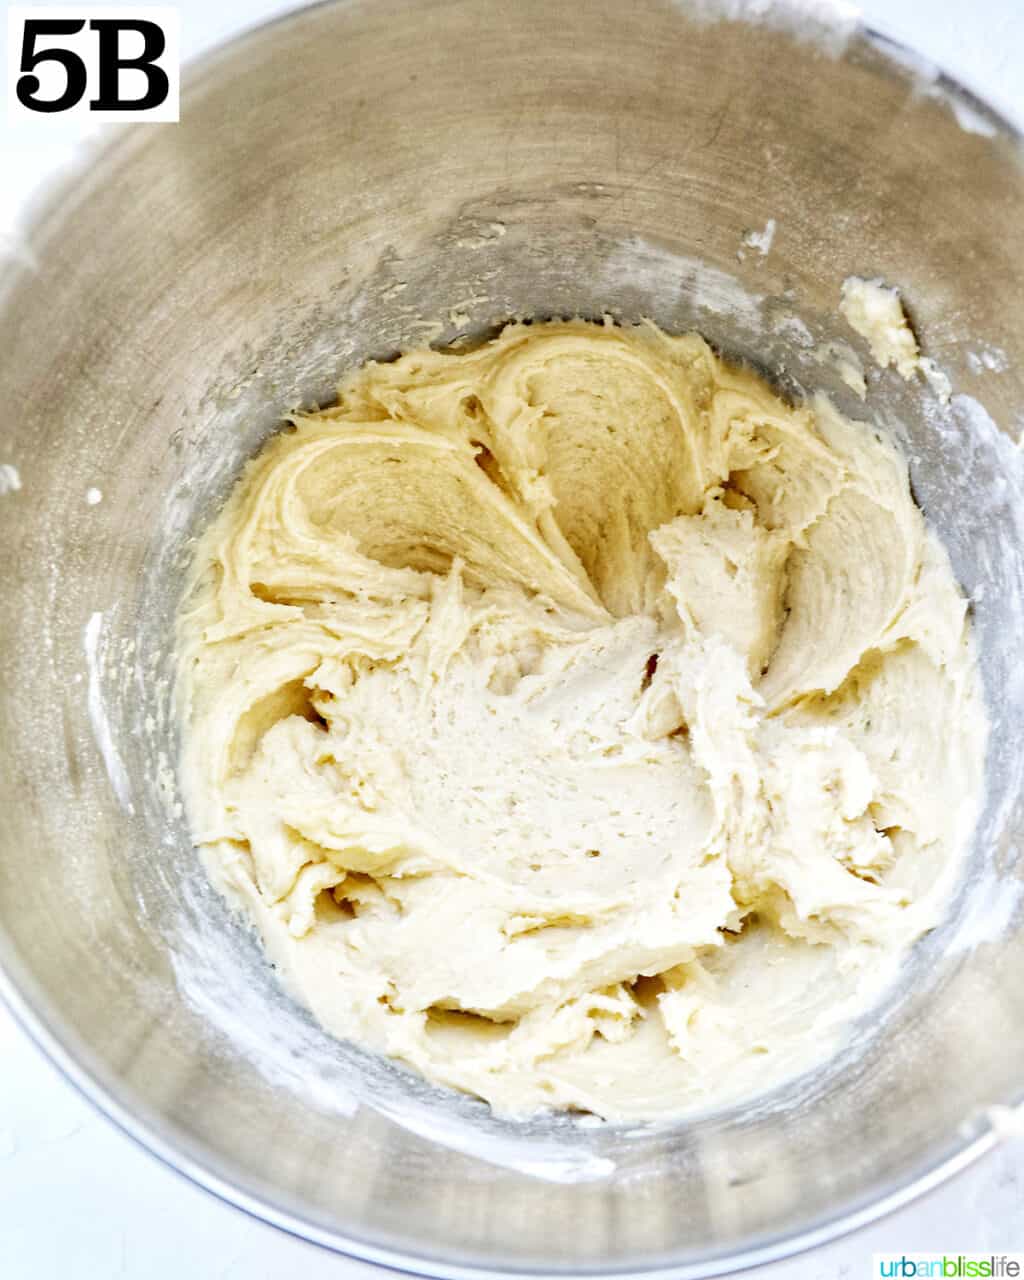 Creamed cake batter in the stainless steel bowl of a stand mixer.